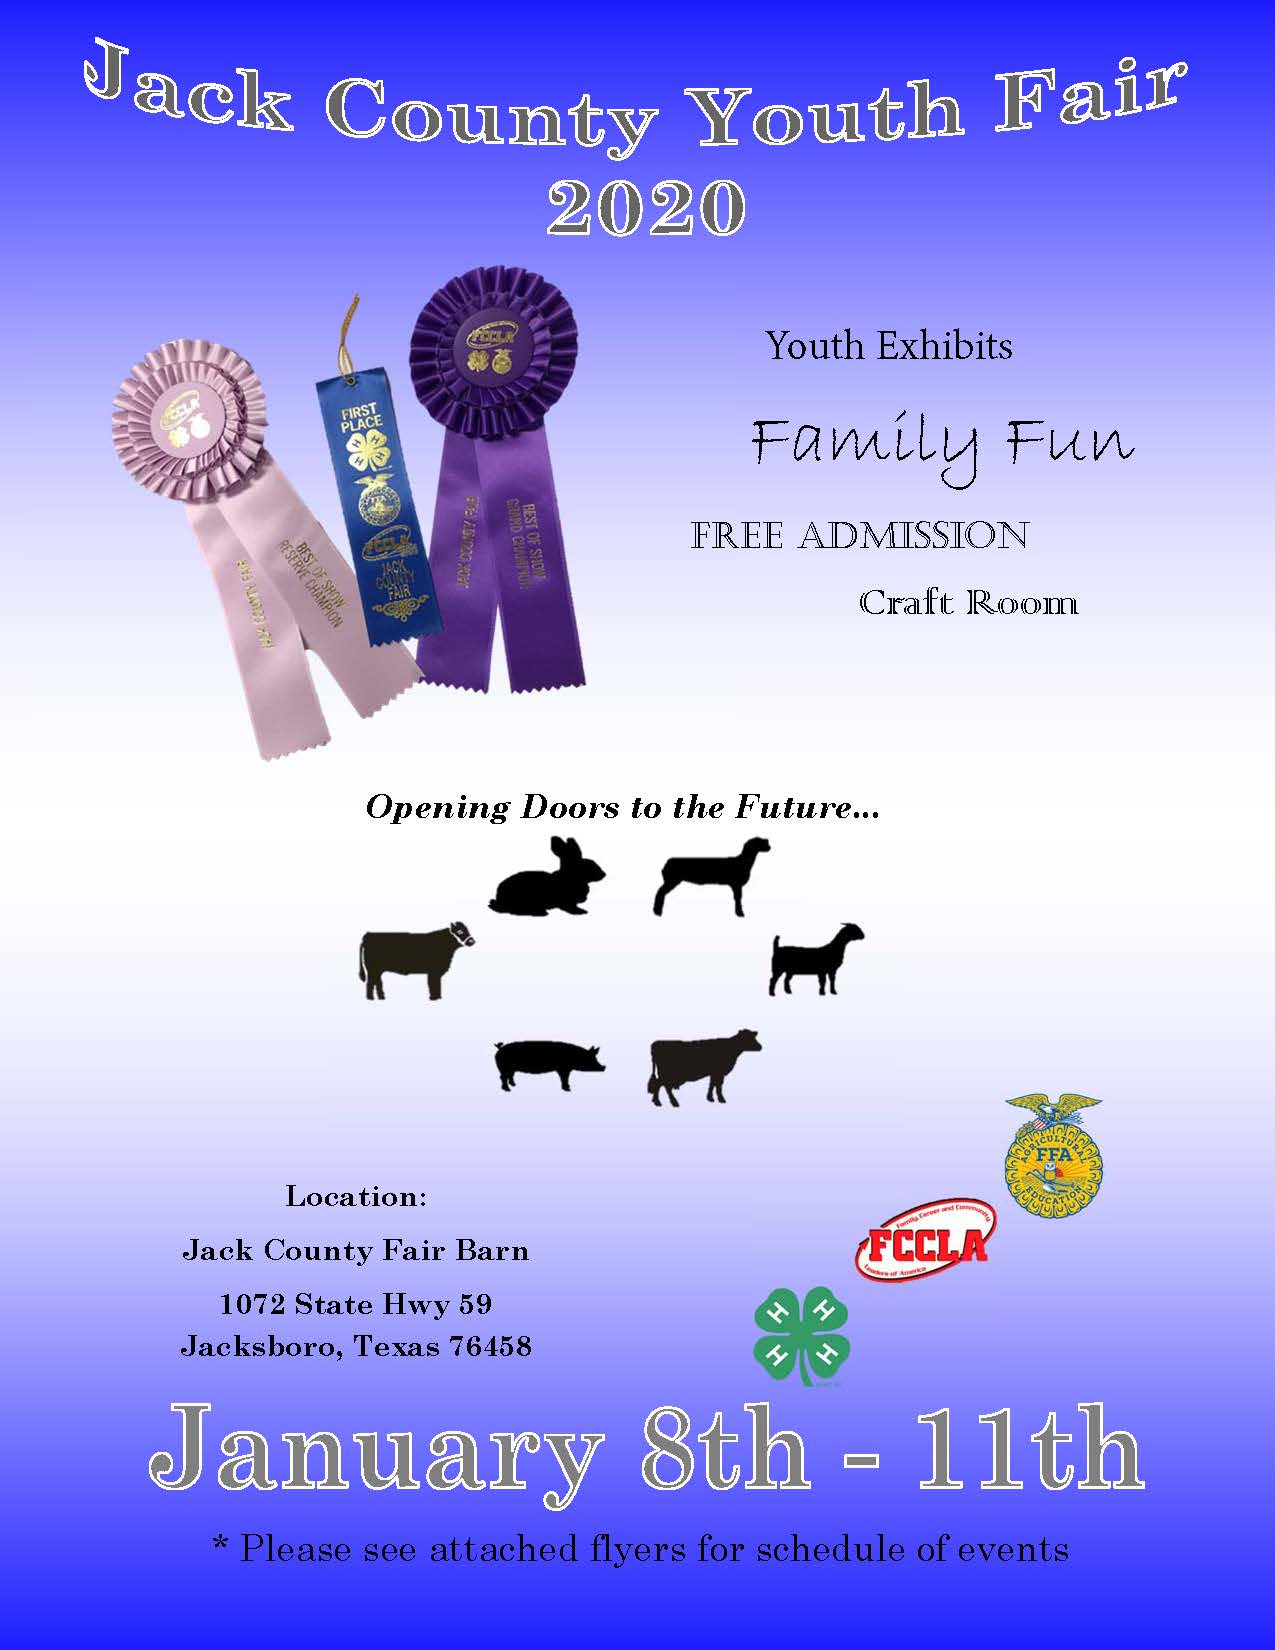 Jack County Youth Fair 2020 Flyer Updated PDF Images_Page_1 Jack